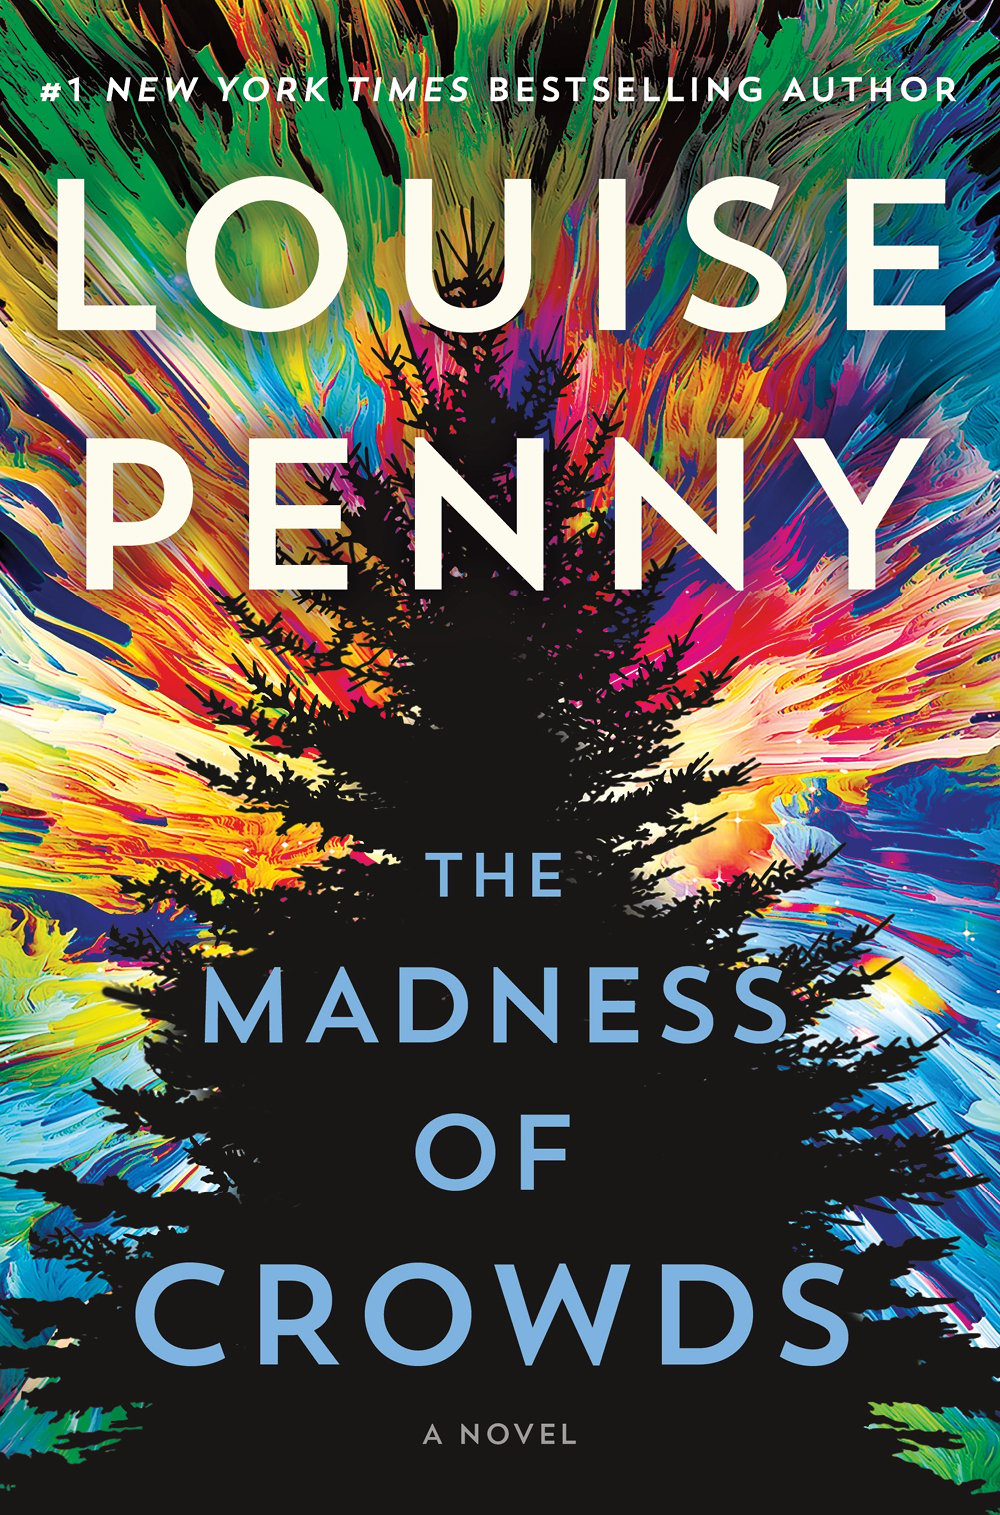 The cover of Louise Penny's 17th Inspector Gamache novel: The Madness of Crowds